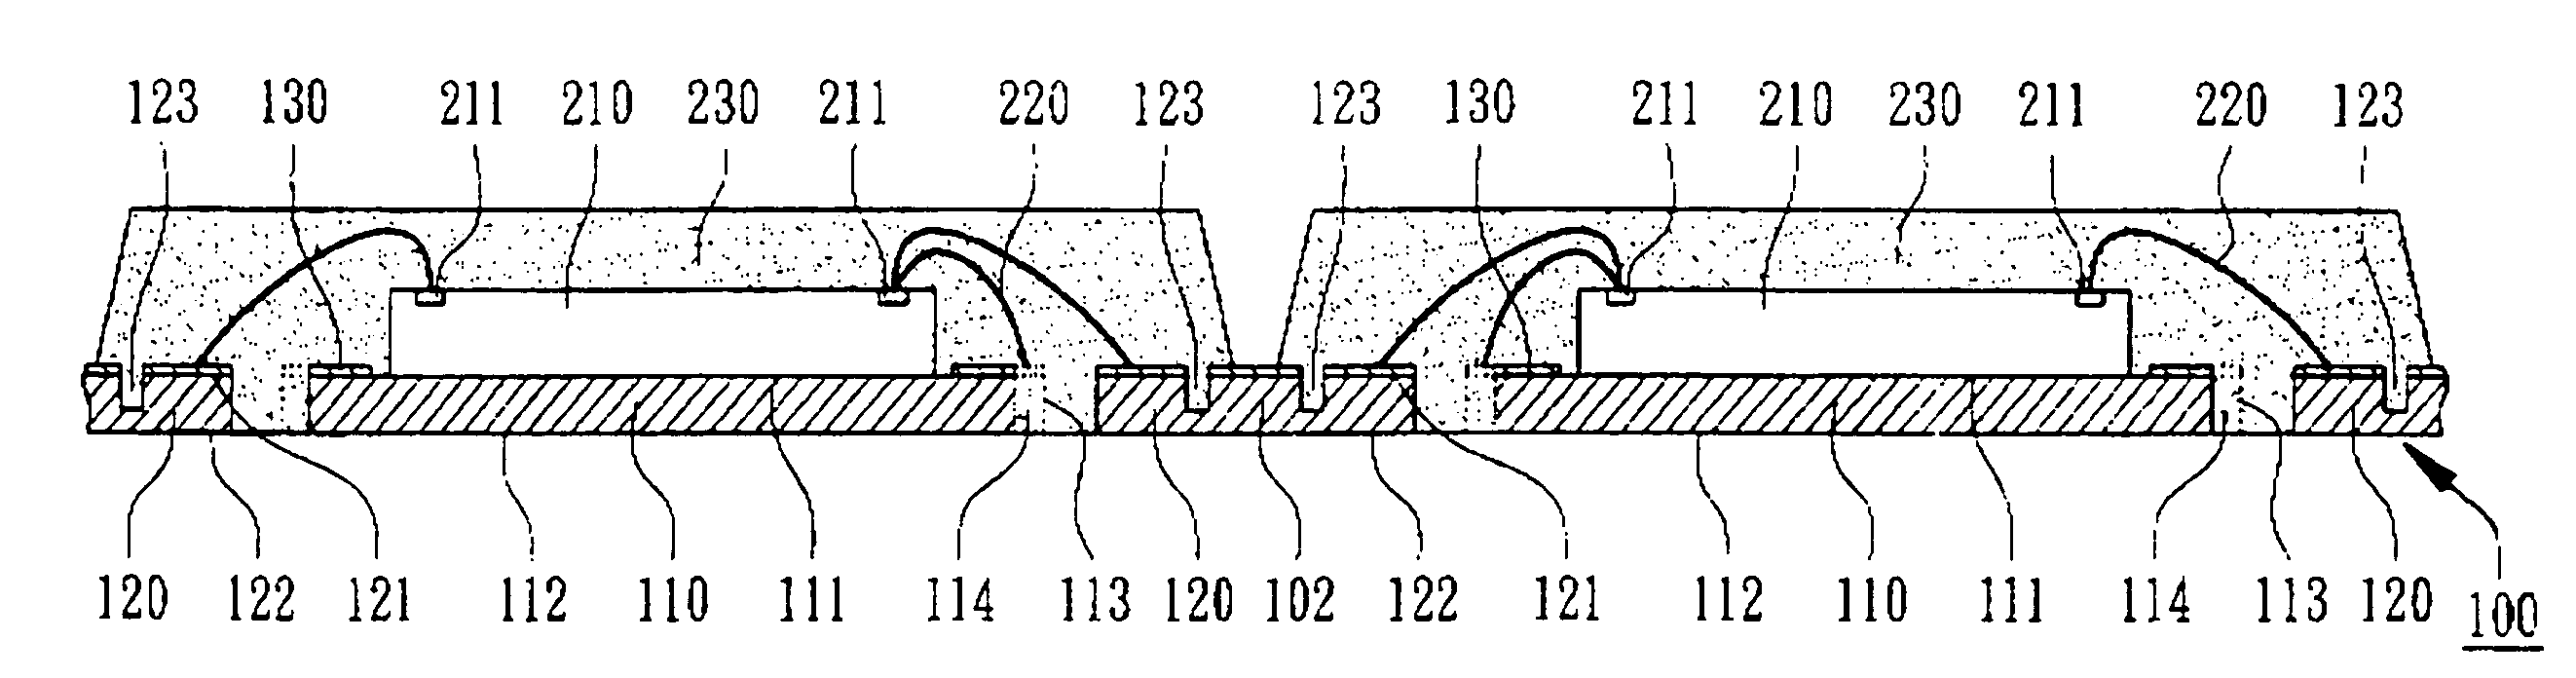 Method for fabricating leadless packages with mold locking characteristics